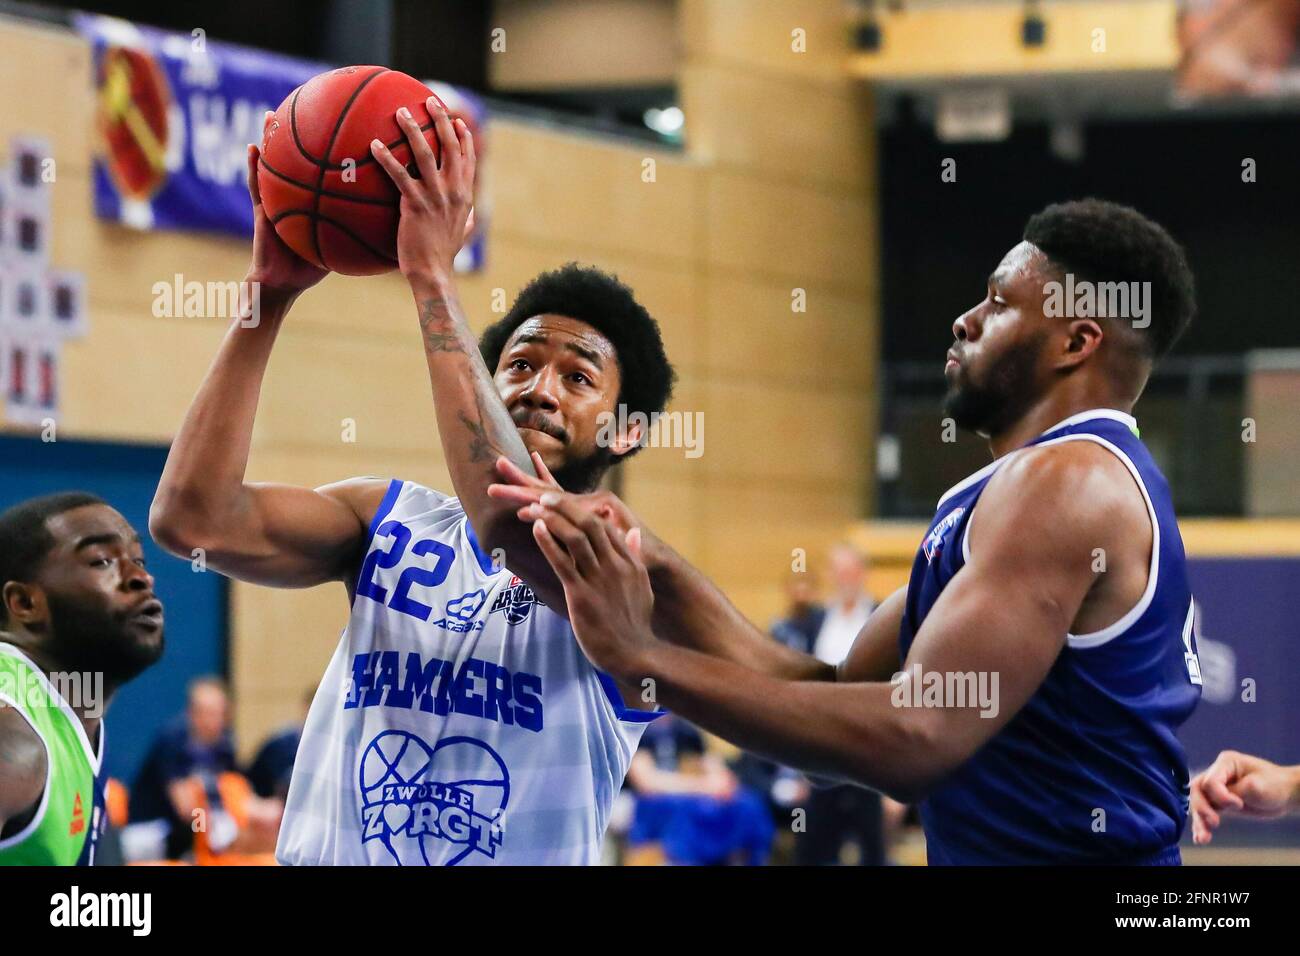 ZWOLLE, NETHERLANDS - MAY 18: Johnathan Dunn of Landstede Hammers Zwolle, Emmanuel Nzekwesi of ZZ Leiden during the DBL semi final play offs match between Landstede Hammers and ZZ Leiden at Landstede sportcentrum on May 18, 2021 in Zwolle, Netherlands (Photo by Albert ten Hove/Orange Pictures) Stock Photo